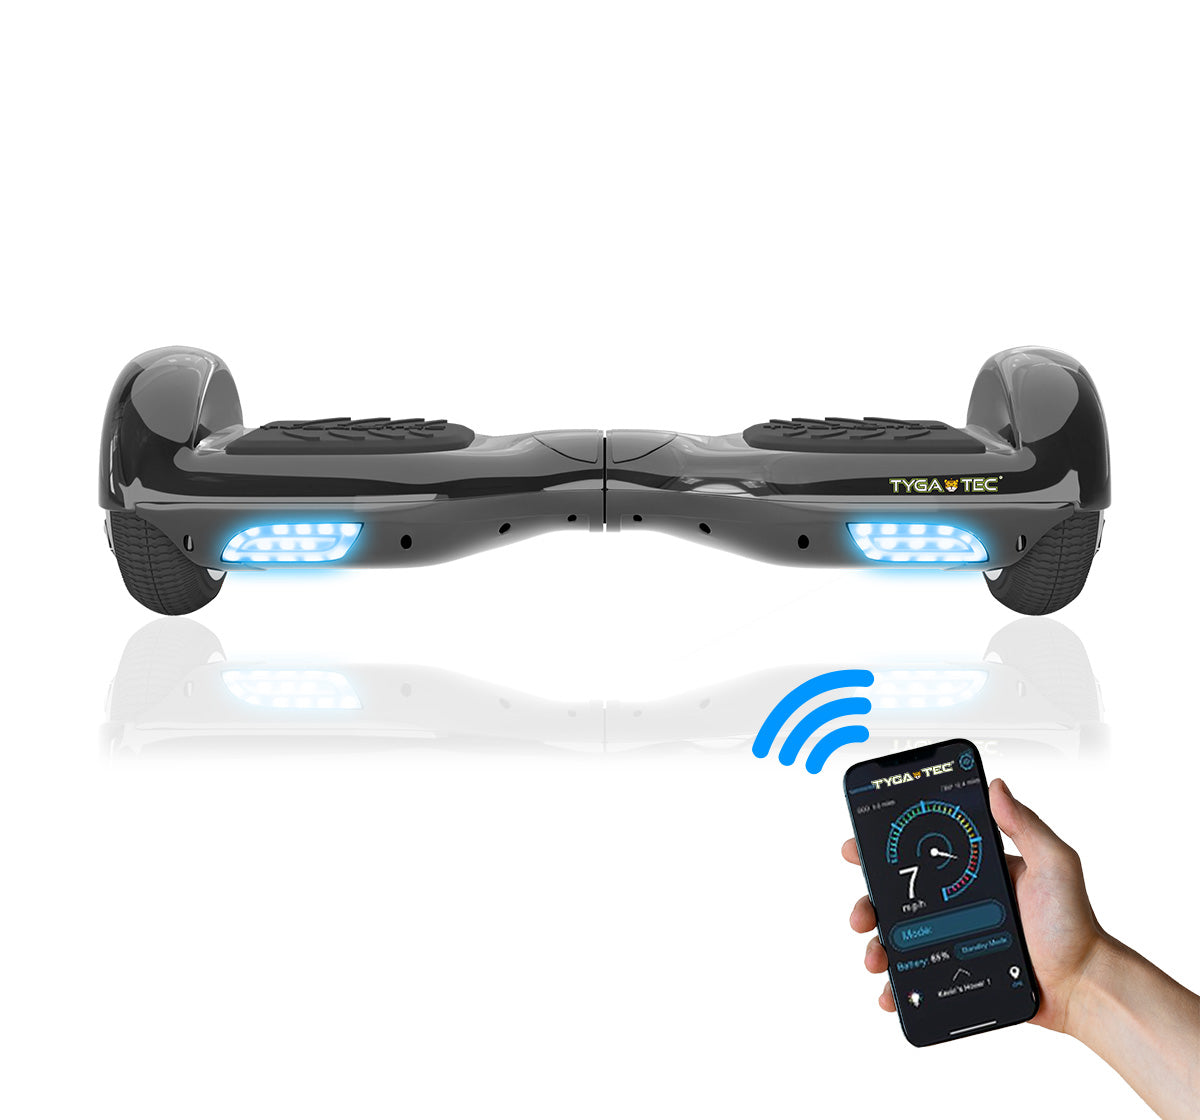 TYGATEC T2 + Auto Balancing Hoverboard App Connectivity - Black